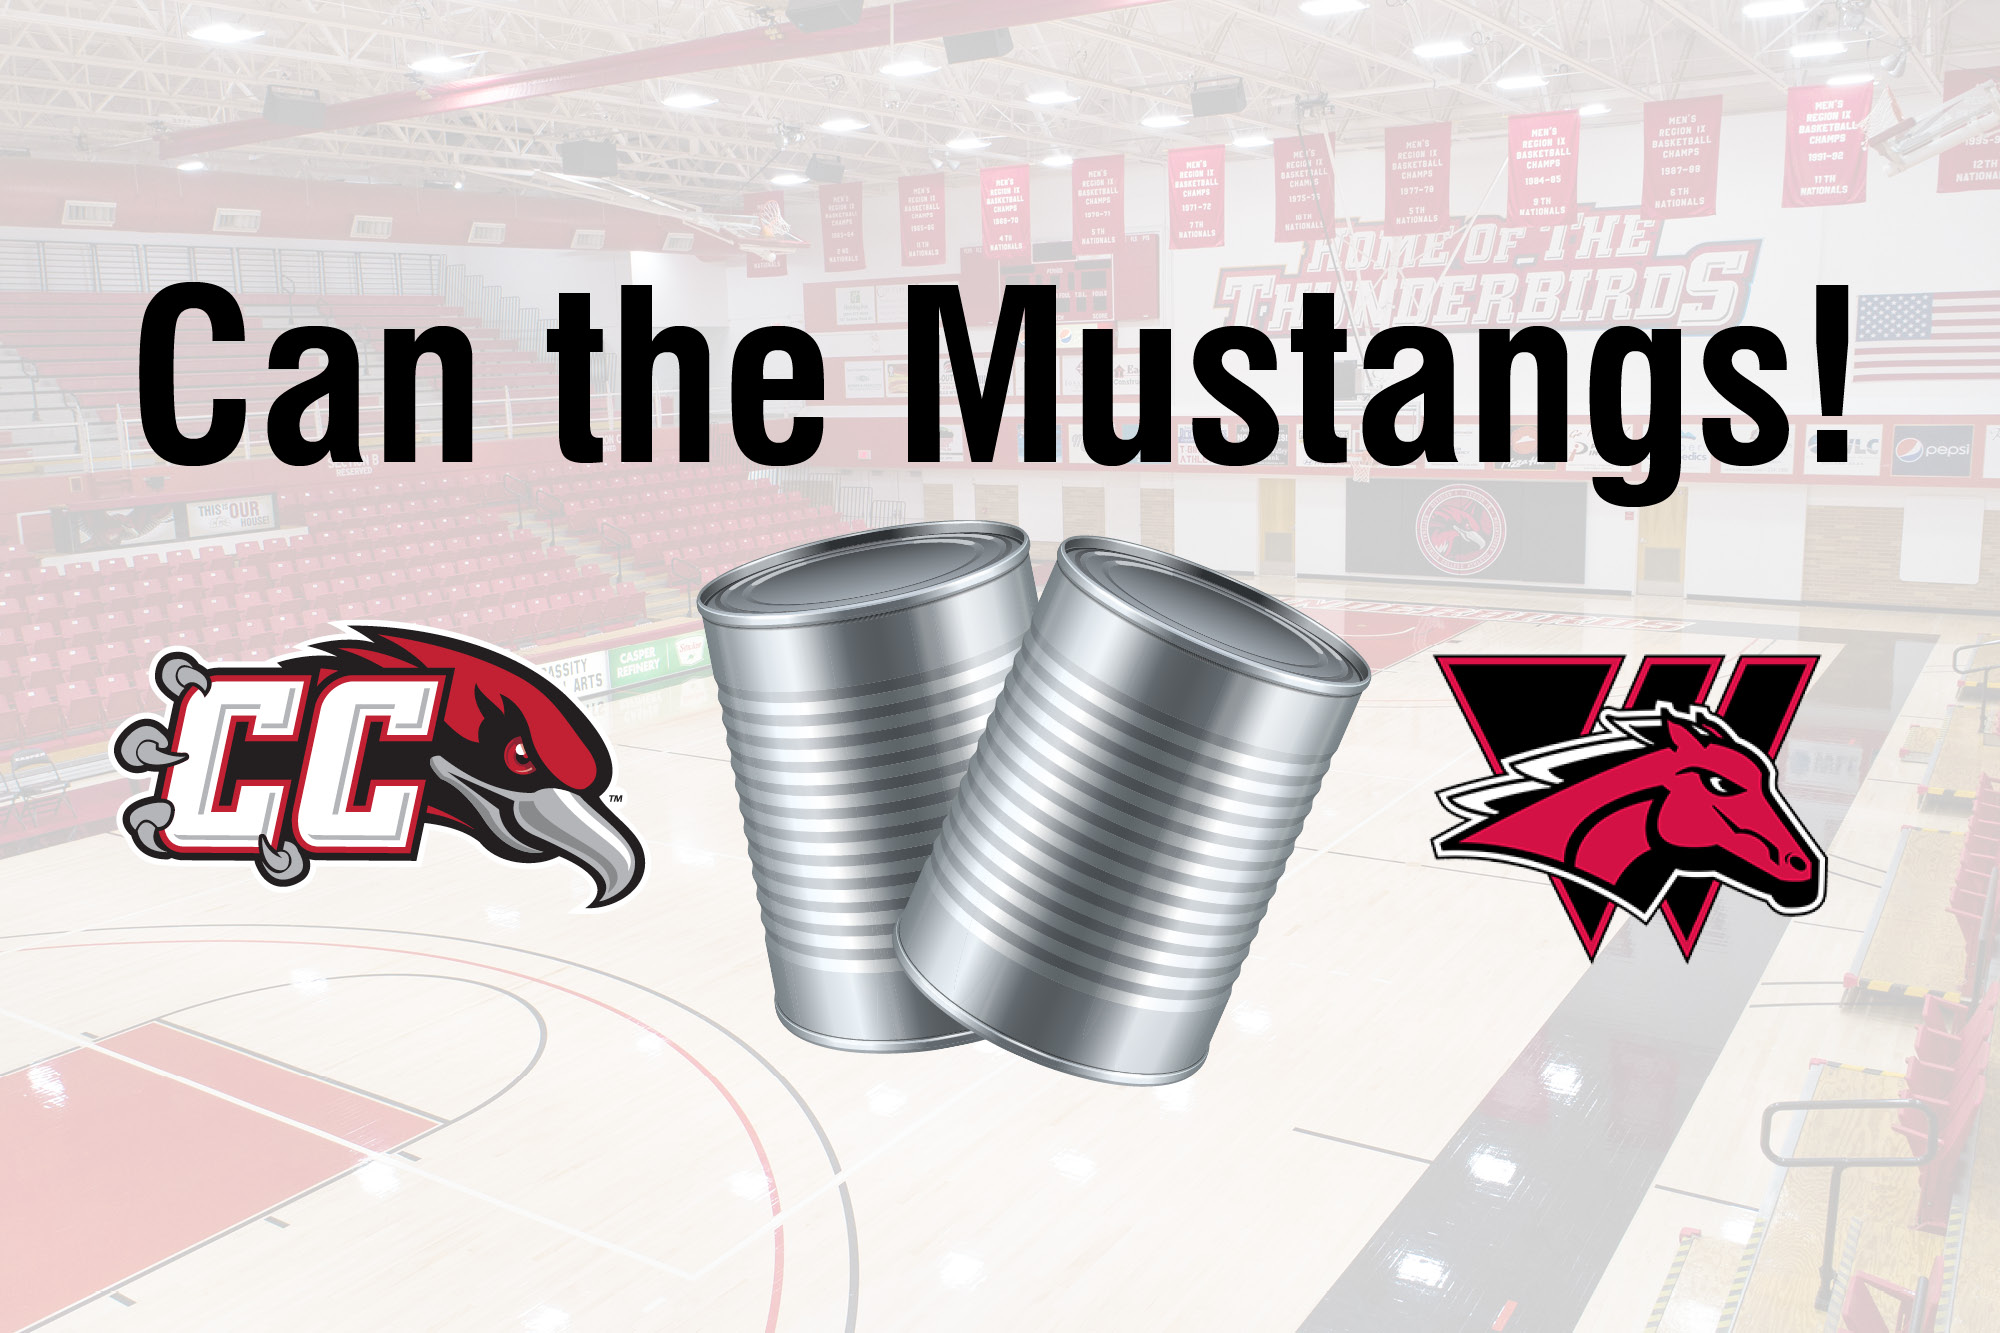 Image for "Can the Mustang" event press release.